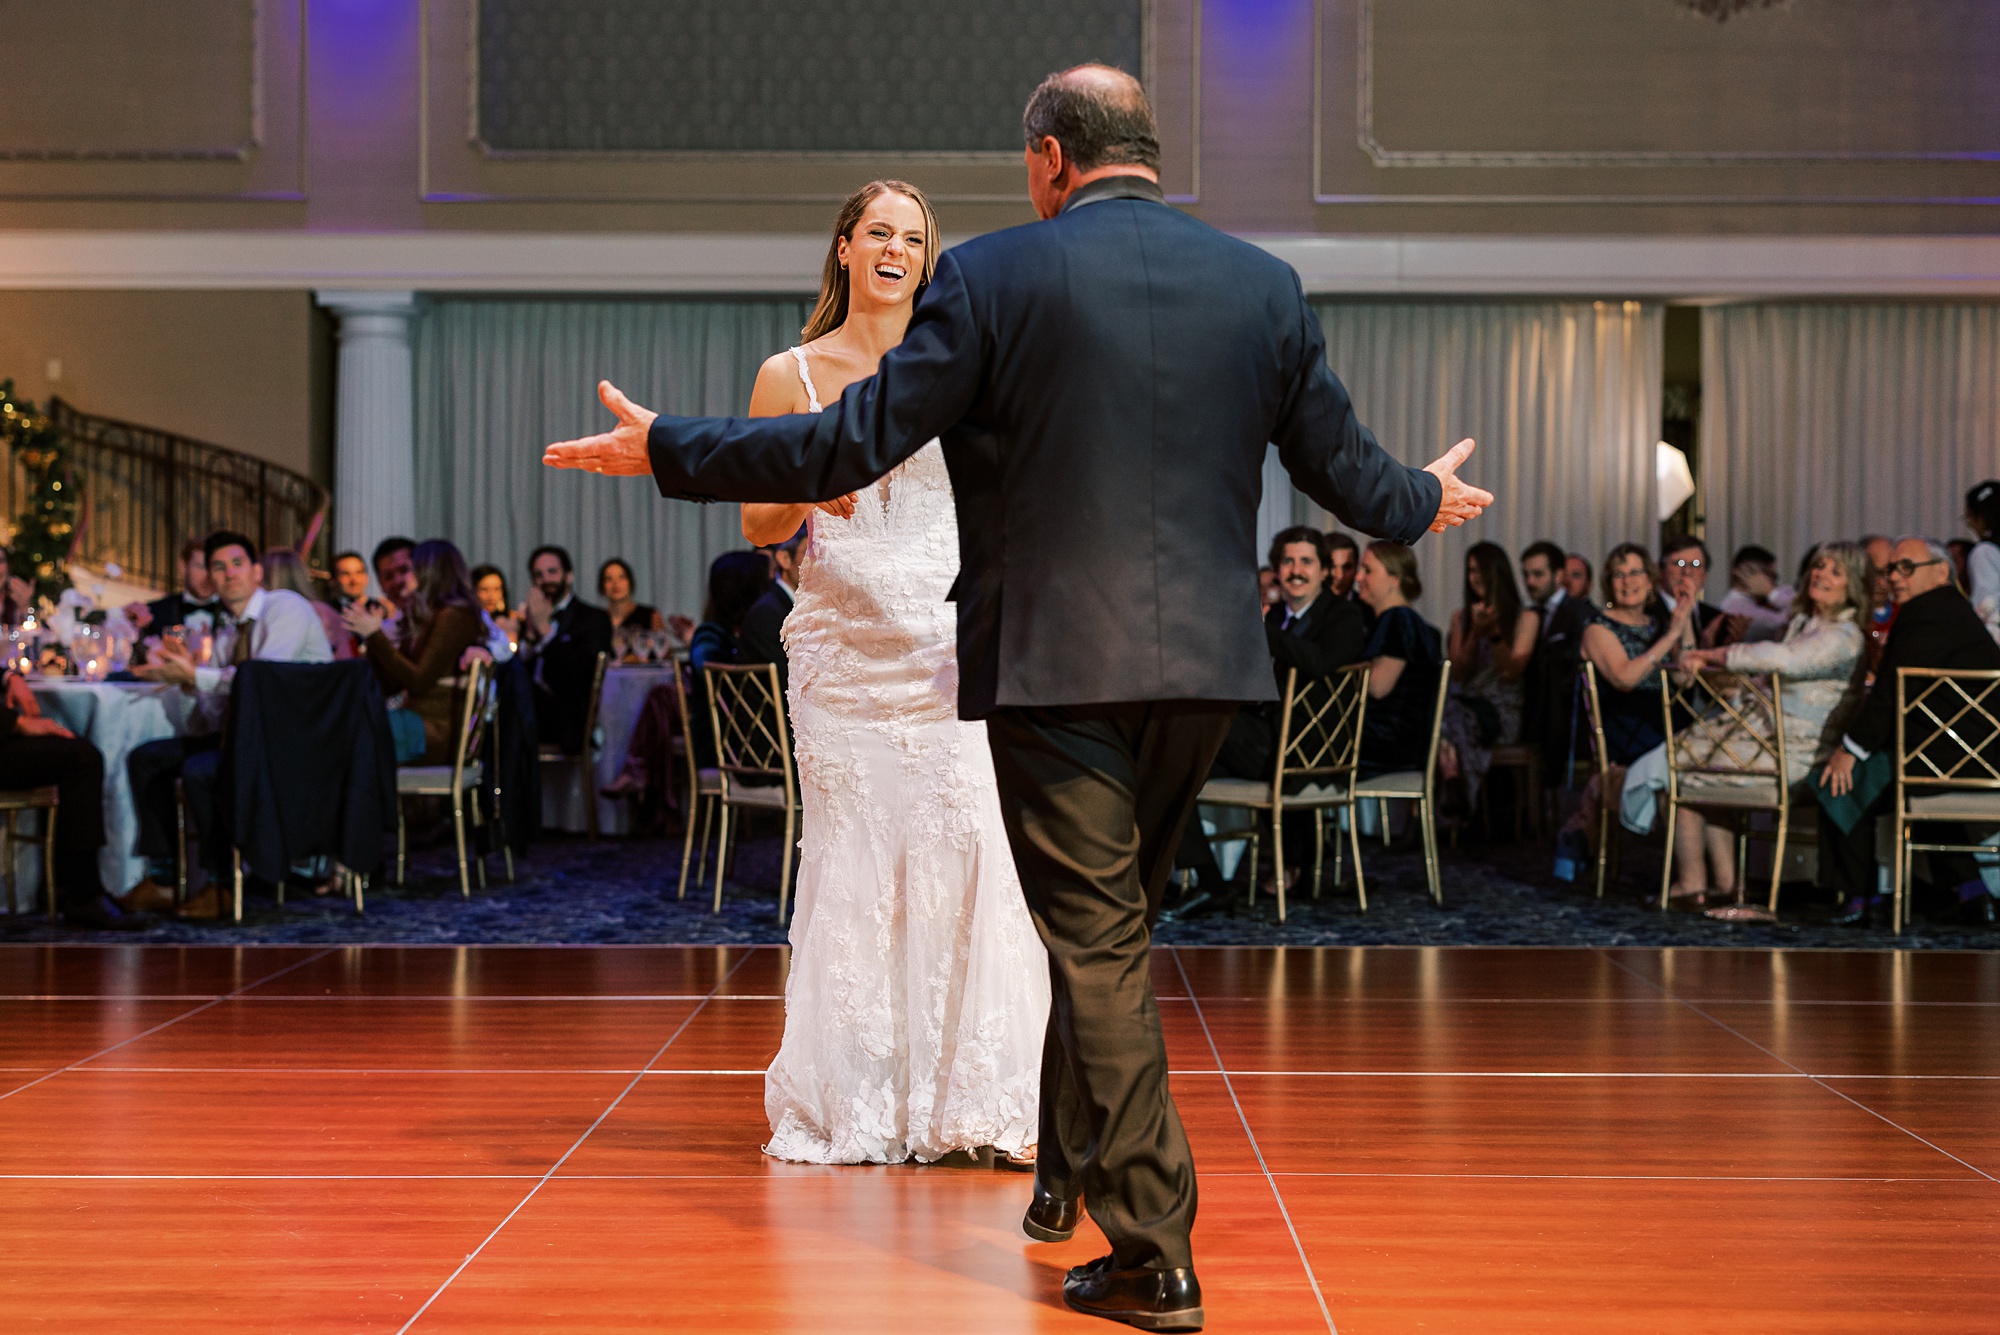 father of bride approaches bride on dance floor 